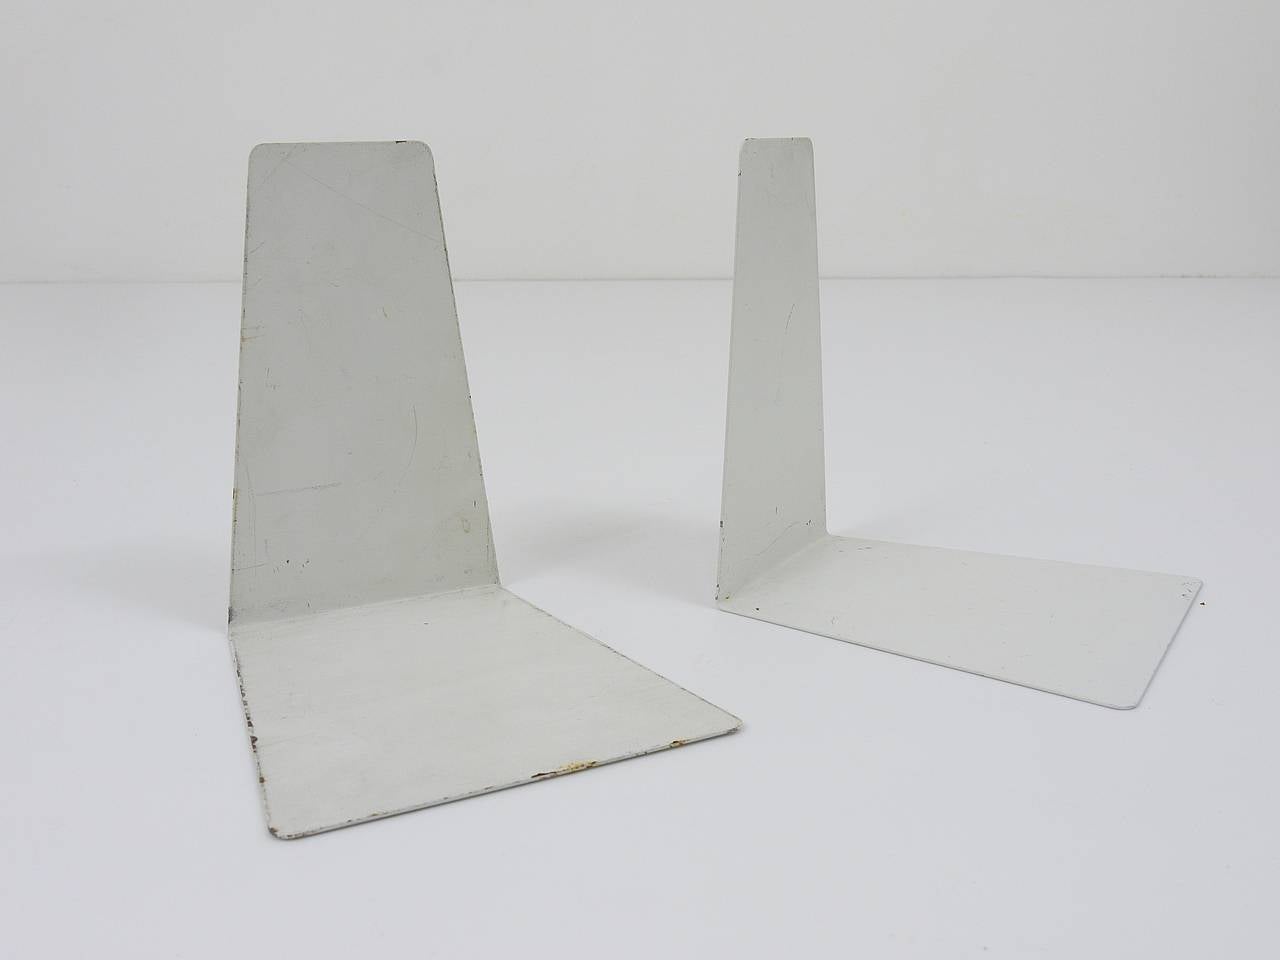 A beautiful pair of white Bauhaus bookends, made of metal, dated around 1930, designed by Marianne Brandt, executed by Ruppel Werke, Gotha, Germany. In good condition, charming size of age. Marked. We offer an identical pair of bookends, but in